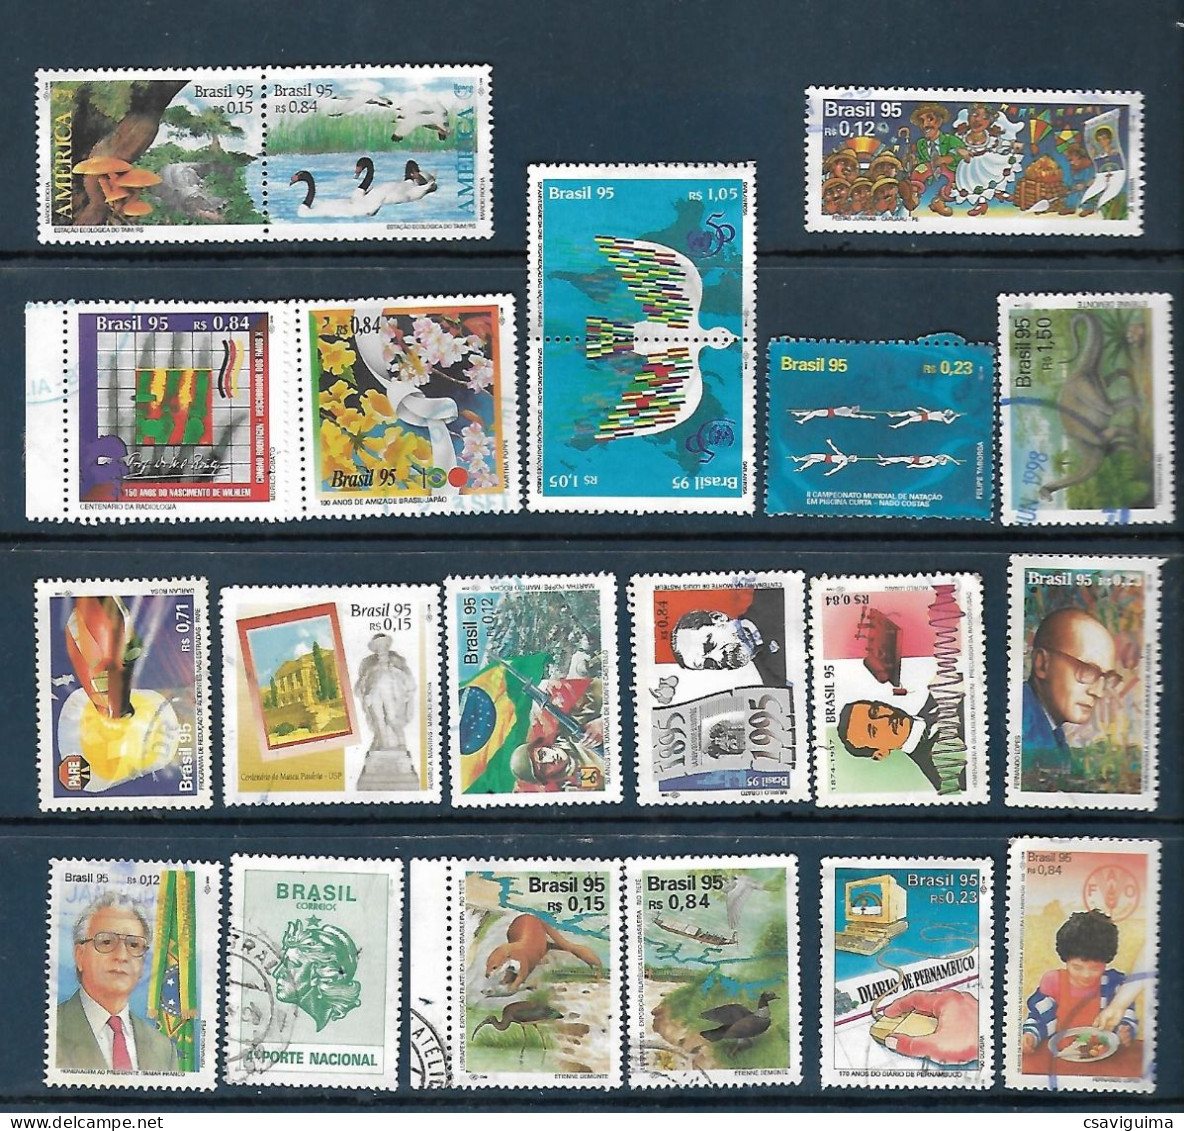 Brasil (Brazil) - 1995 - Set 20 Stamps: Used, Hinged (##5) - Used Stamps